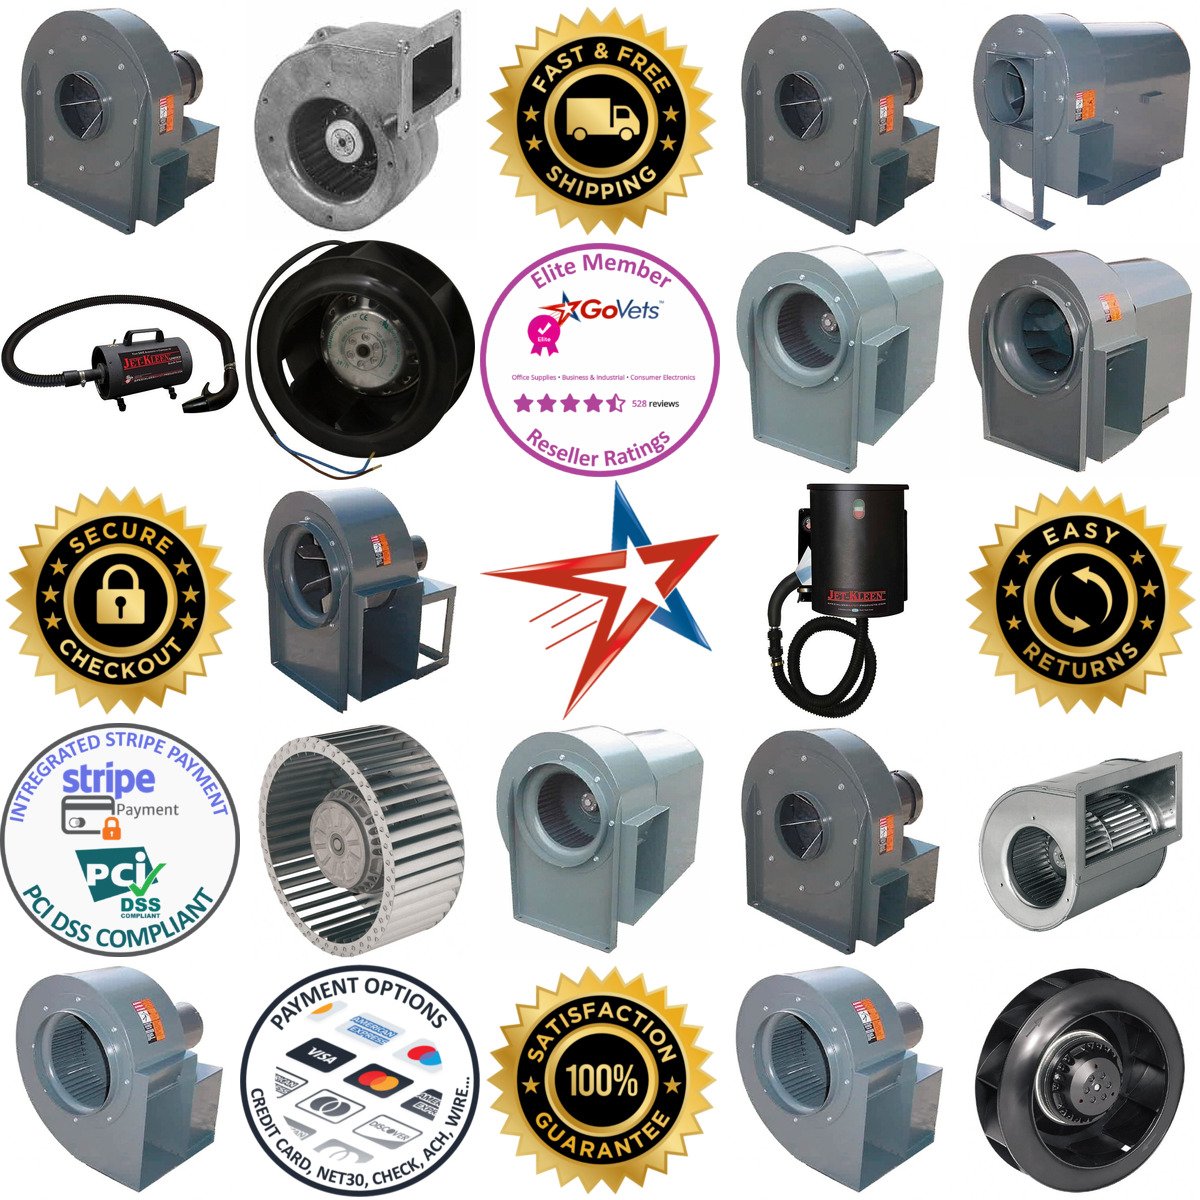 A selection of Blowers products on GoVets